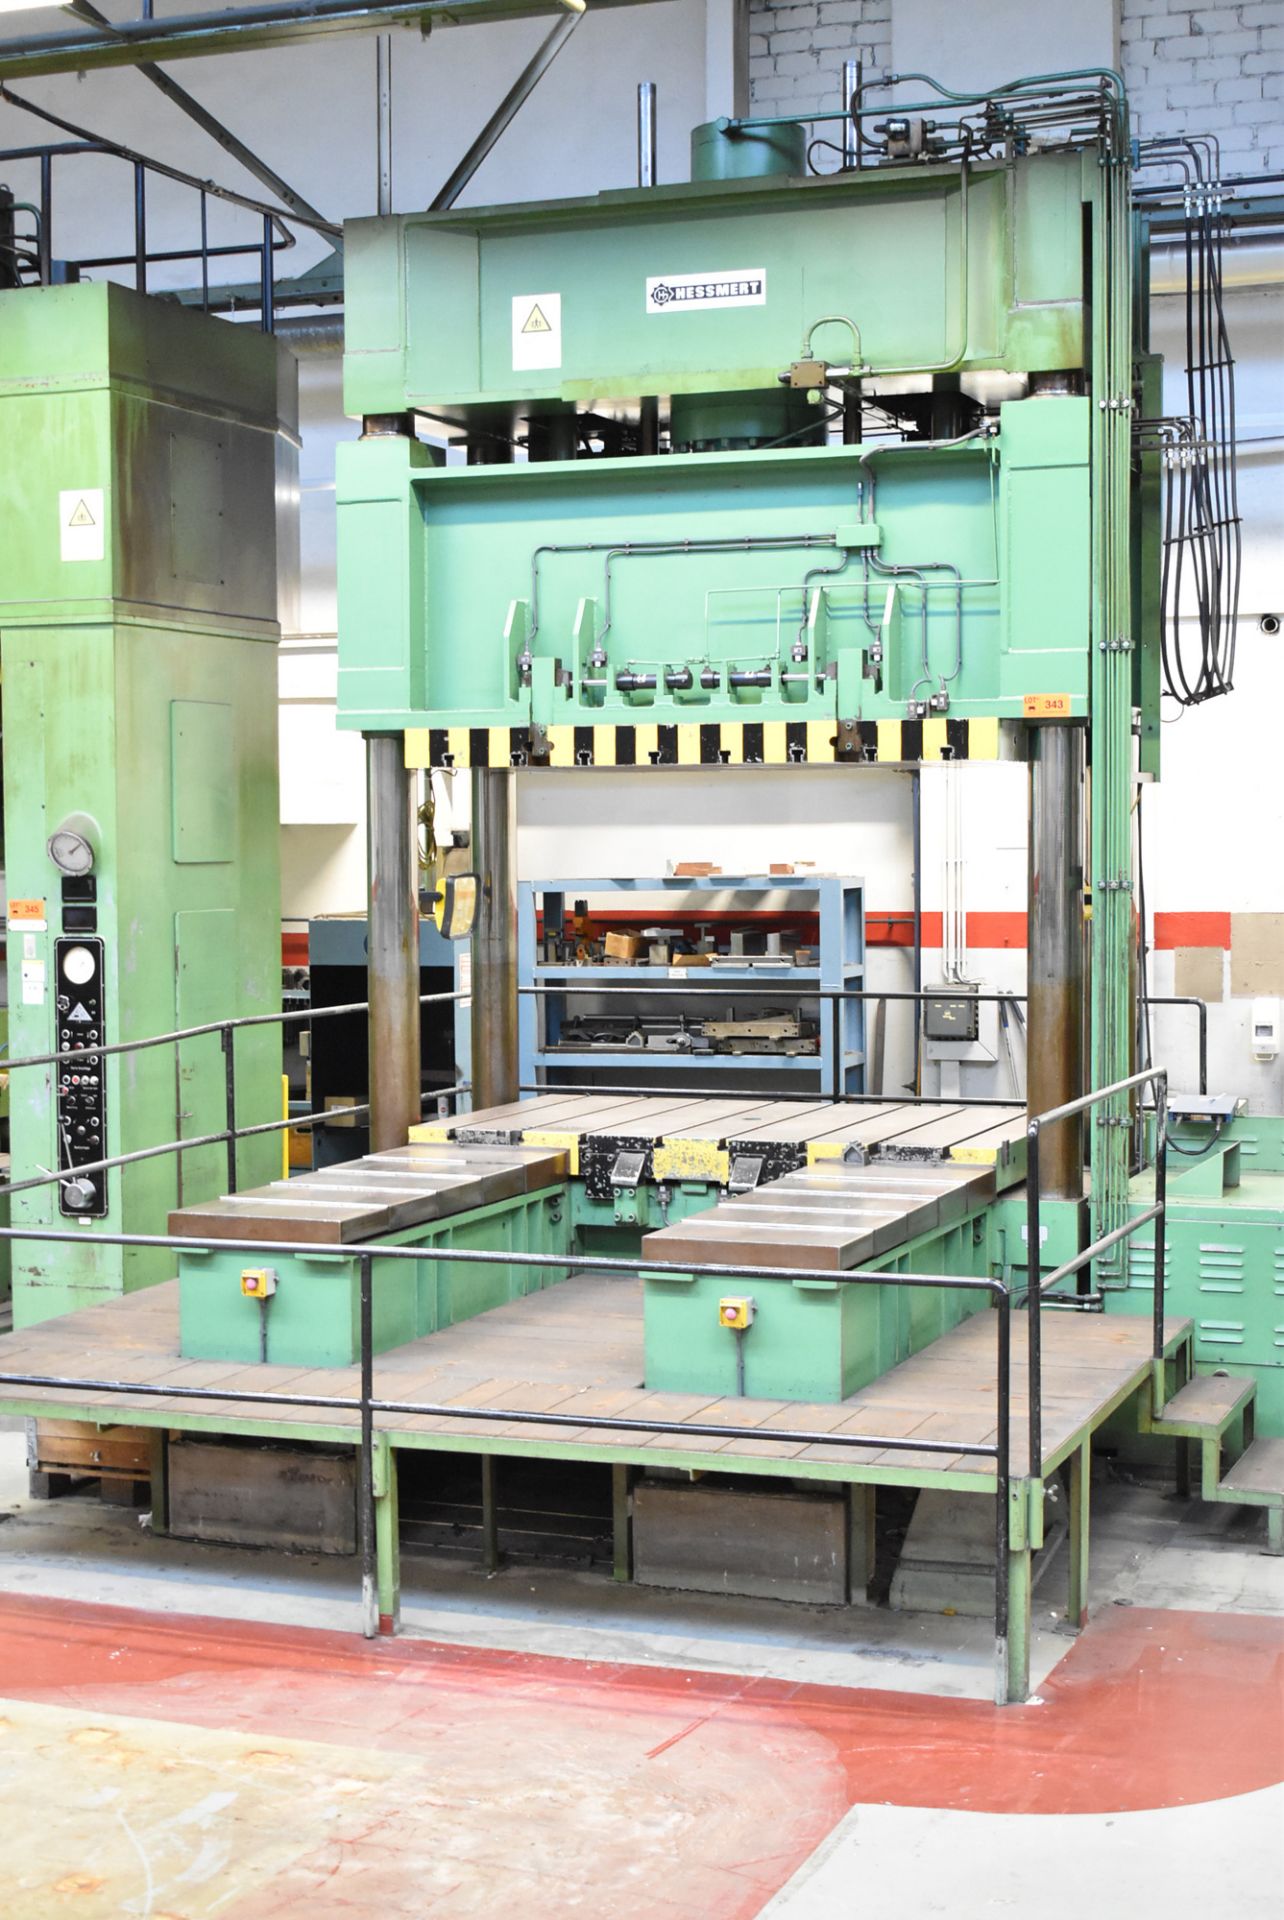 HESSMERT TS 300-25 300 TON CAPACITY FOUR POST HYDRAULIC DIE SPOTTING PRESS WITH CONVENTIONAL - Image 3 of 18